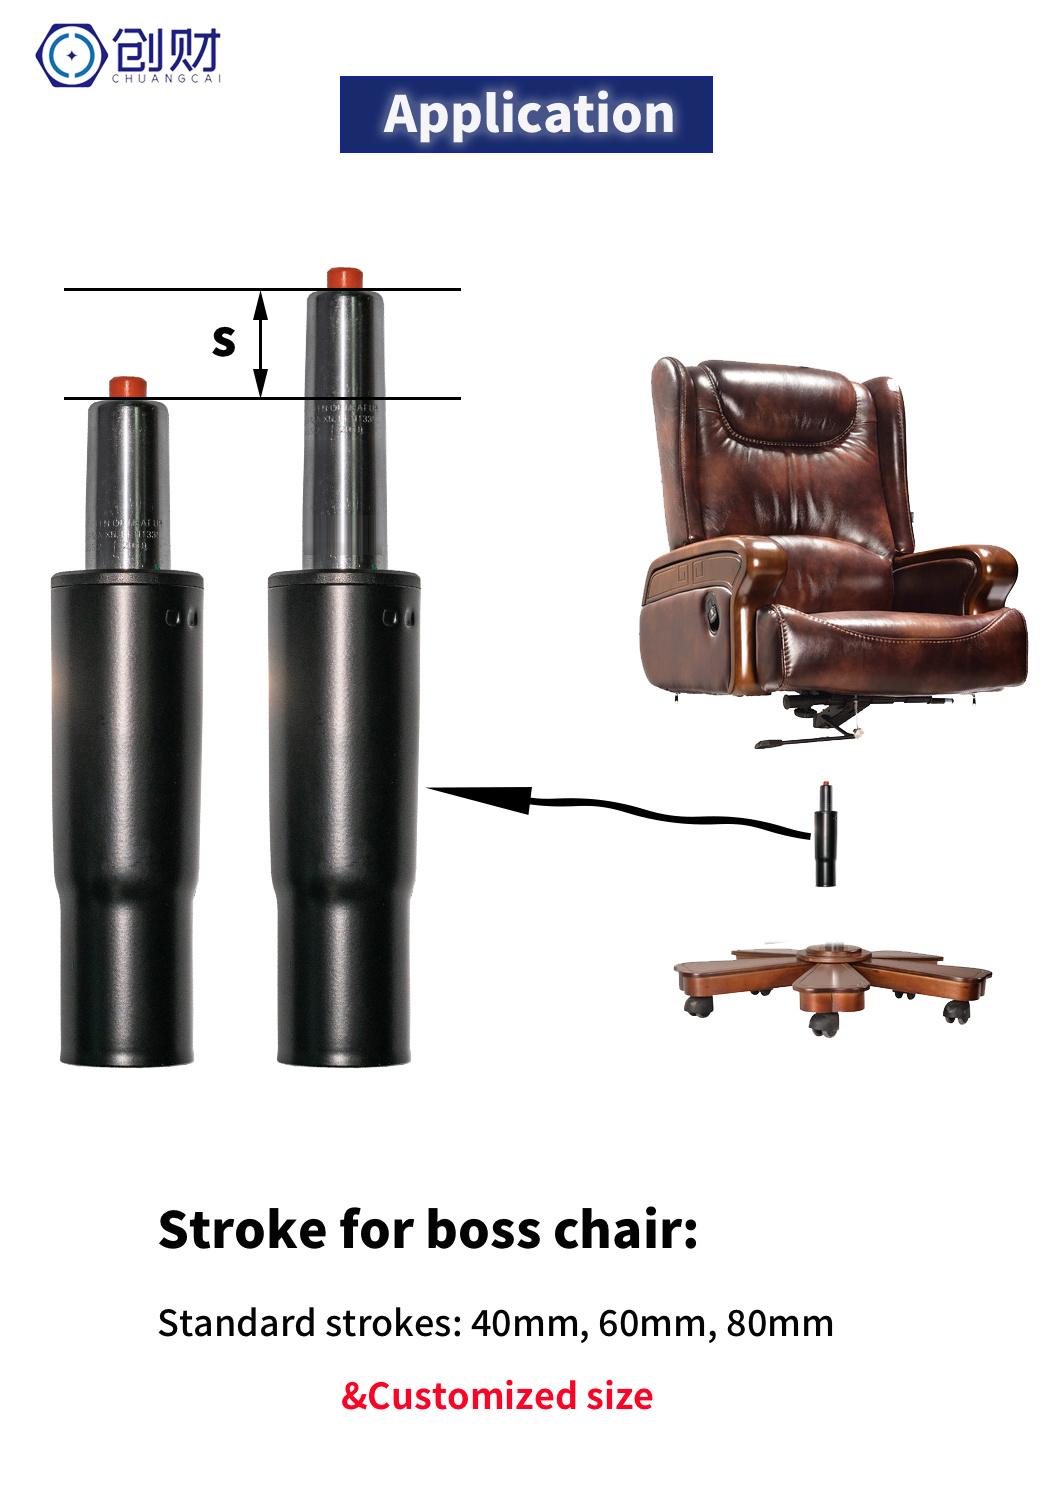 Hight Quality Non-Rotating Gas Spring for Office Chair